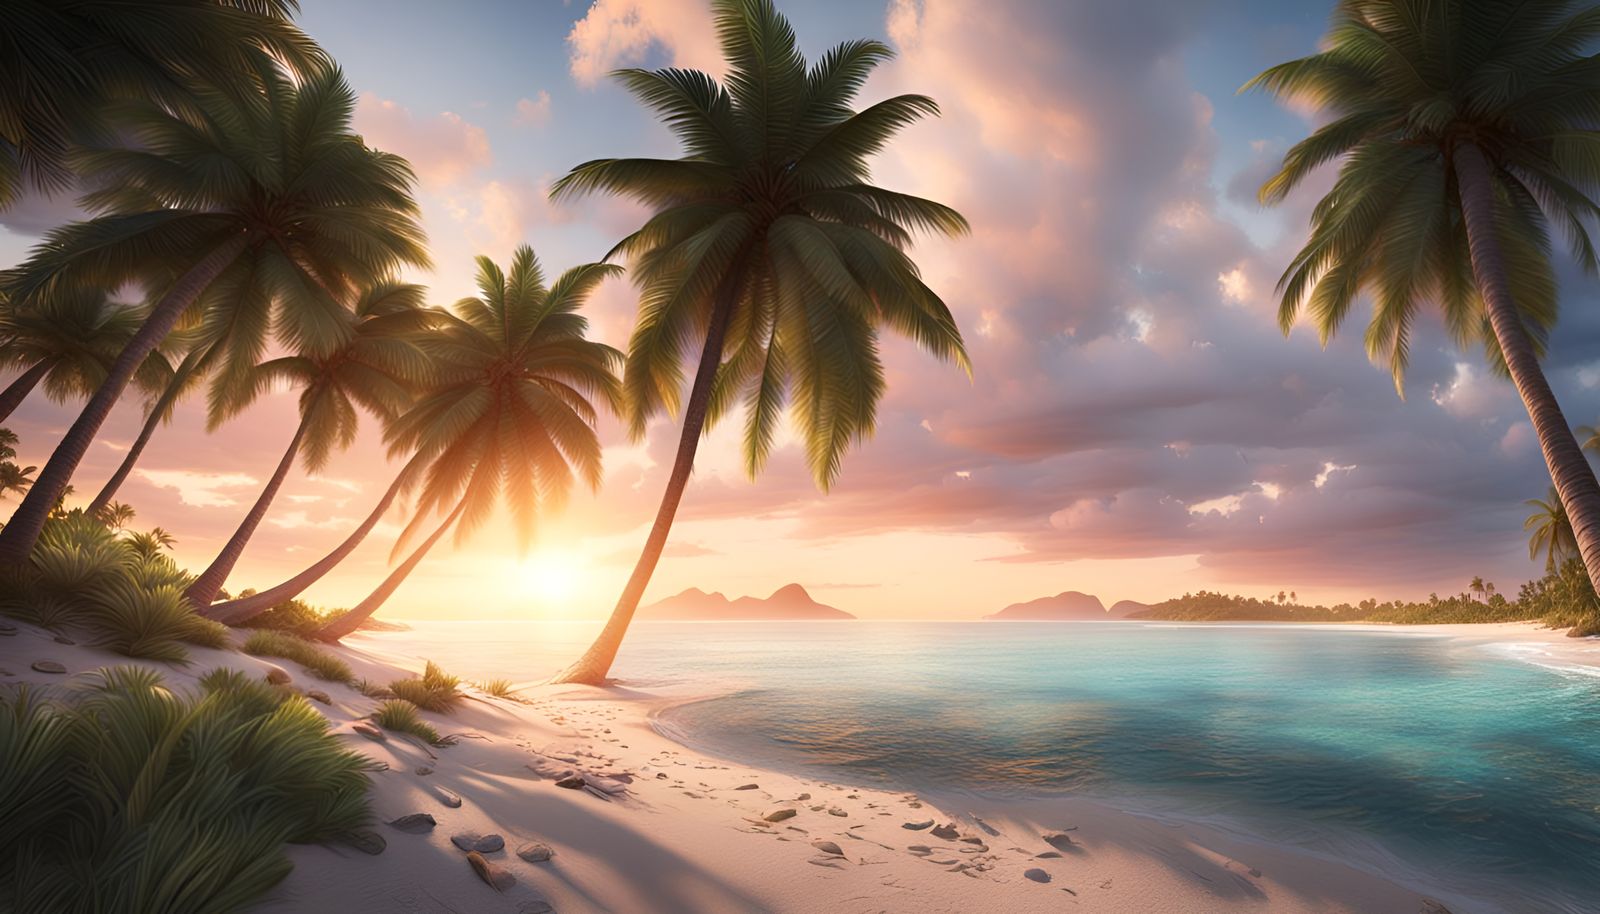 A beautiful tropical white sand beach with palm trees and a breathtaking sunset.